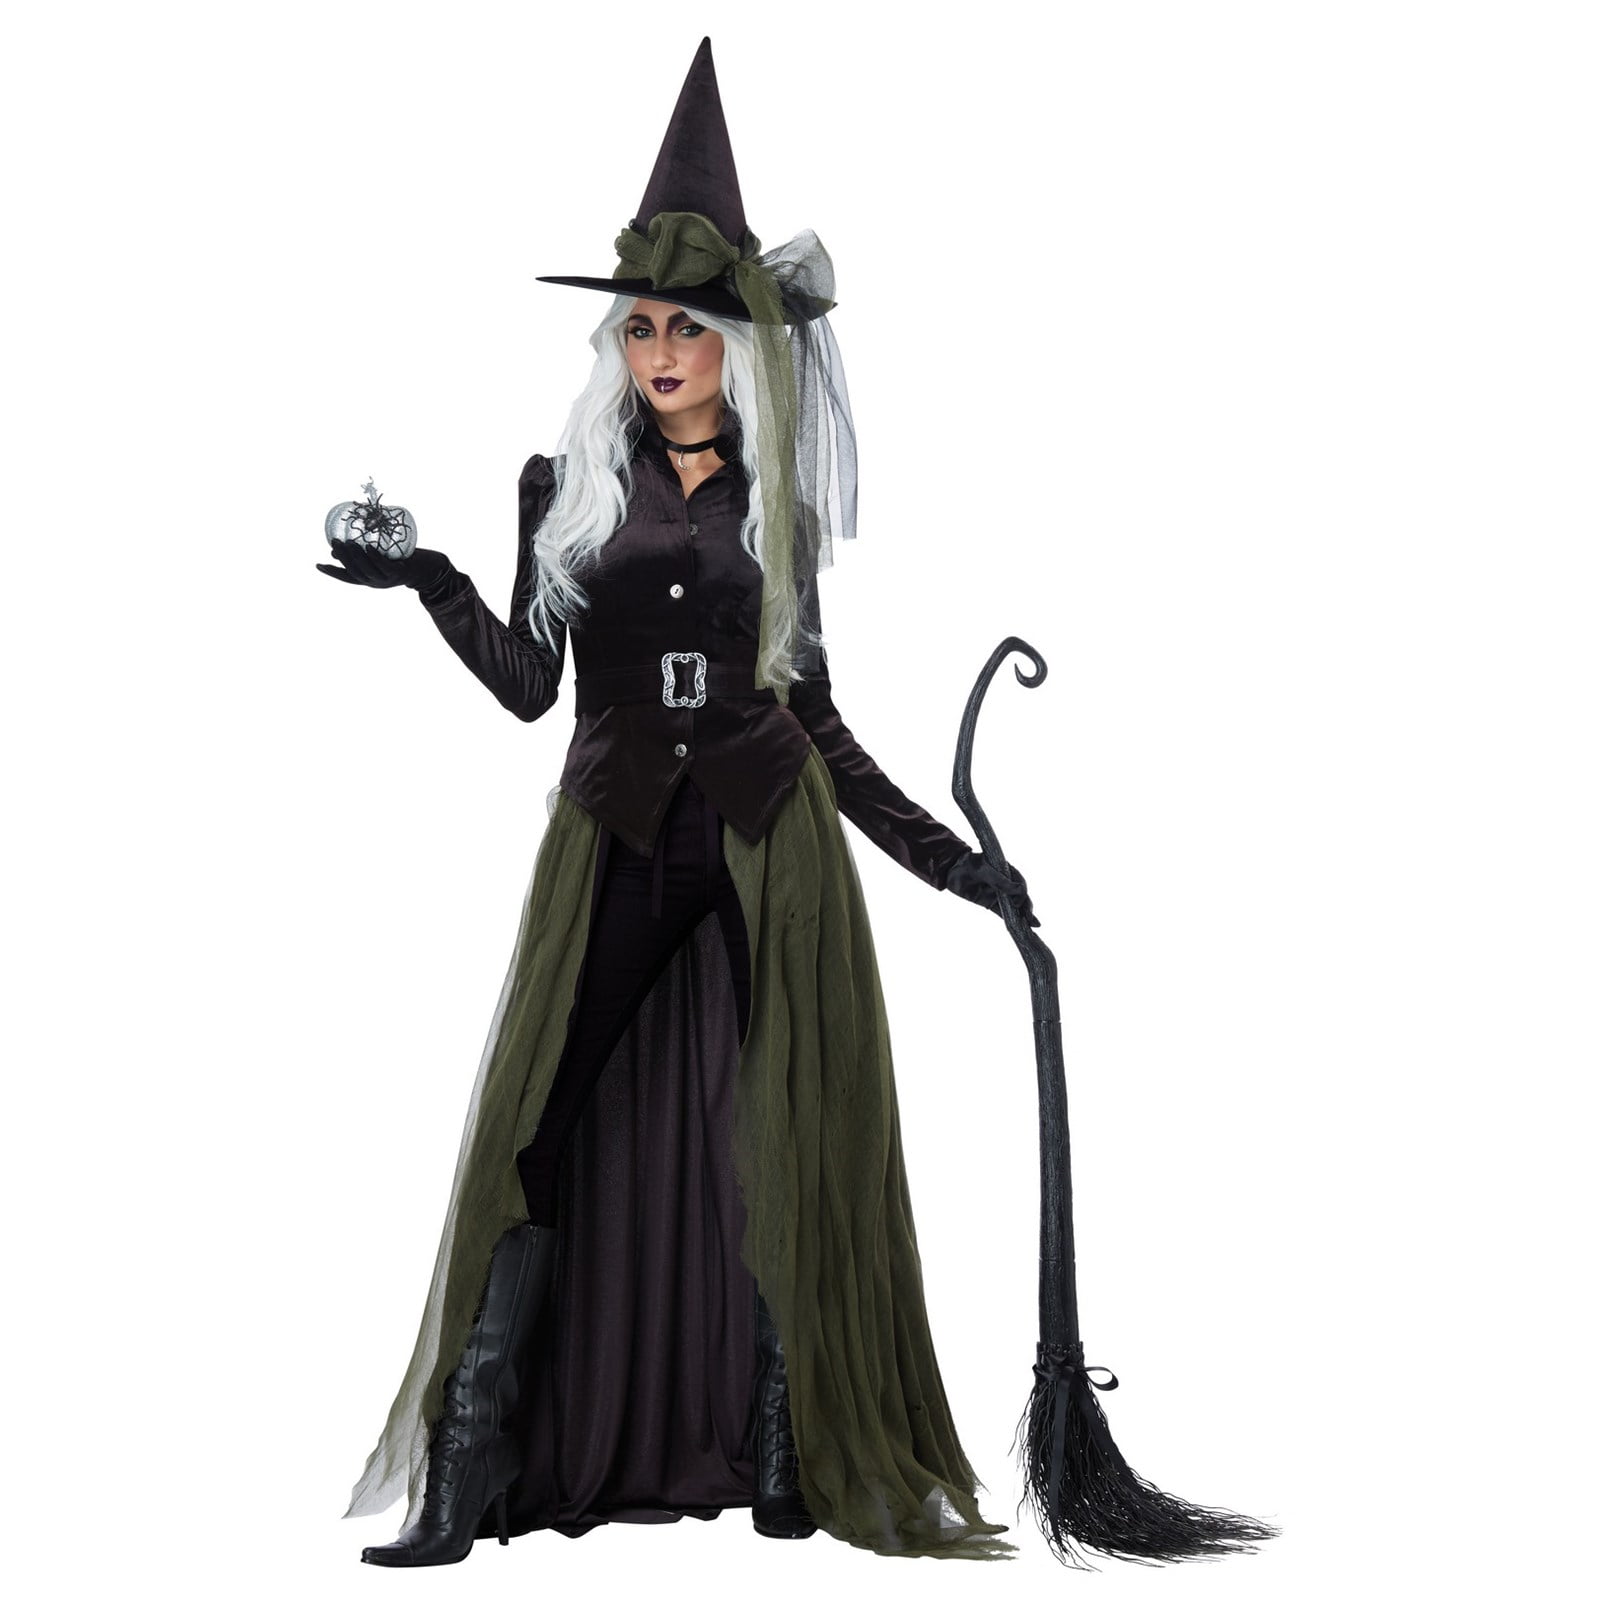 Gothic wicked witch sorceress adult womens fancy dress halloween costume.